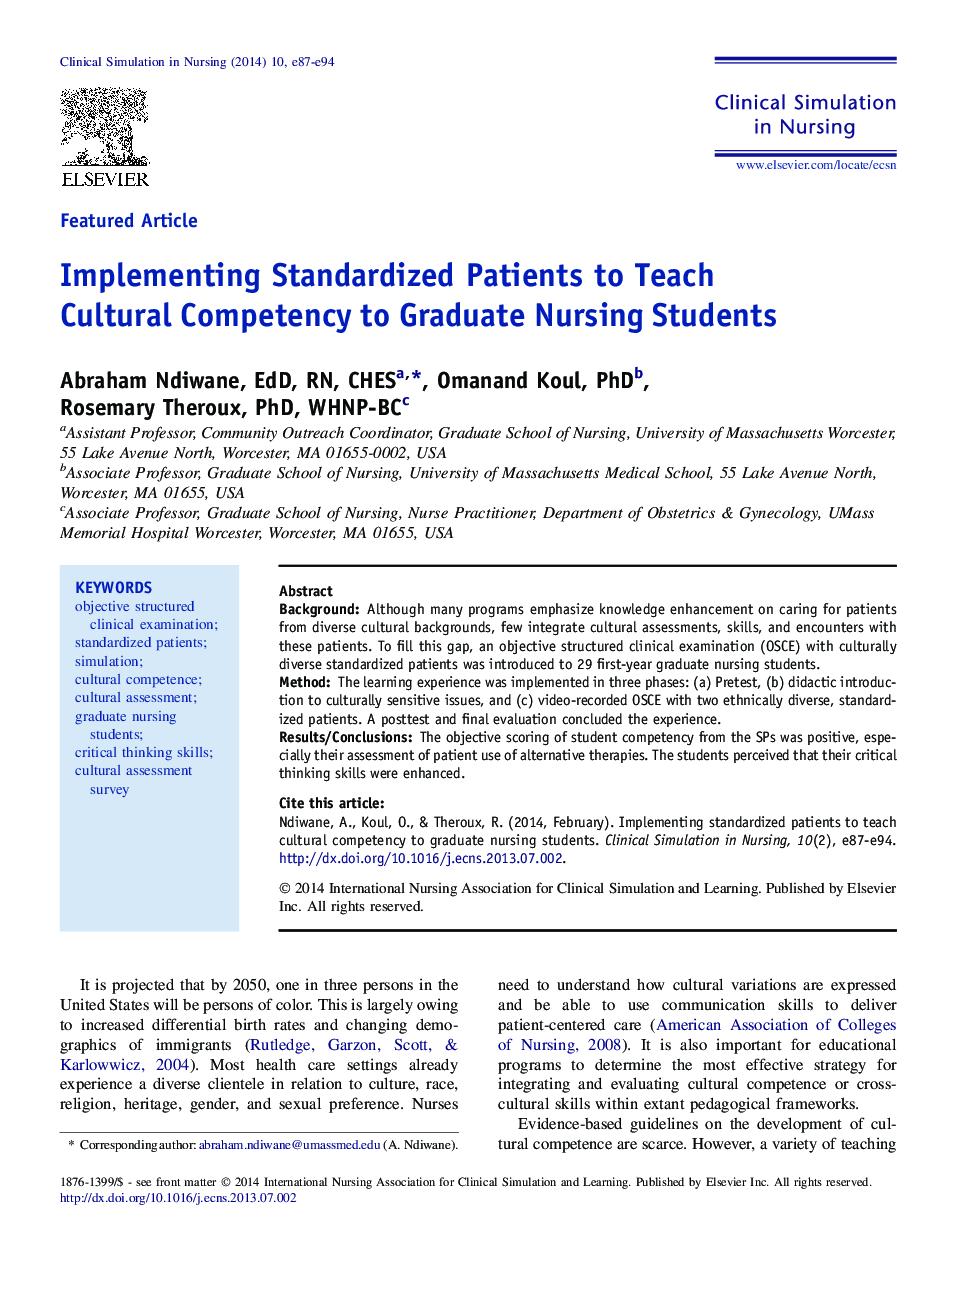 Featured ArticleImplementing Standardized Patients to Teach Cultural Competency to Graduate Nursing Students